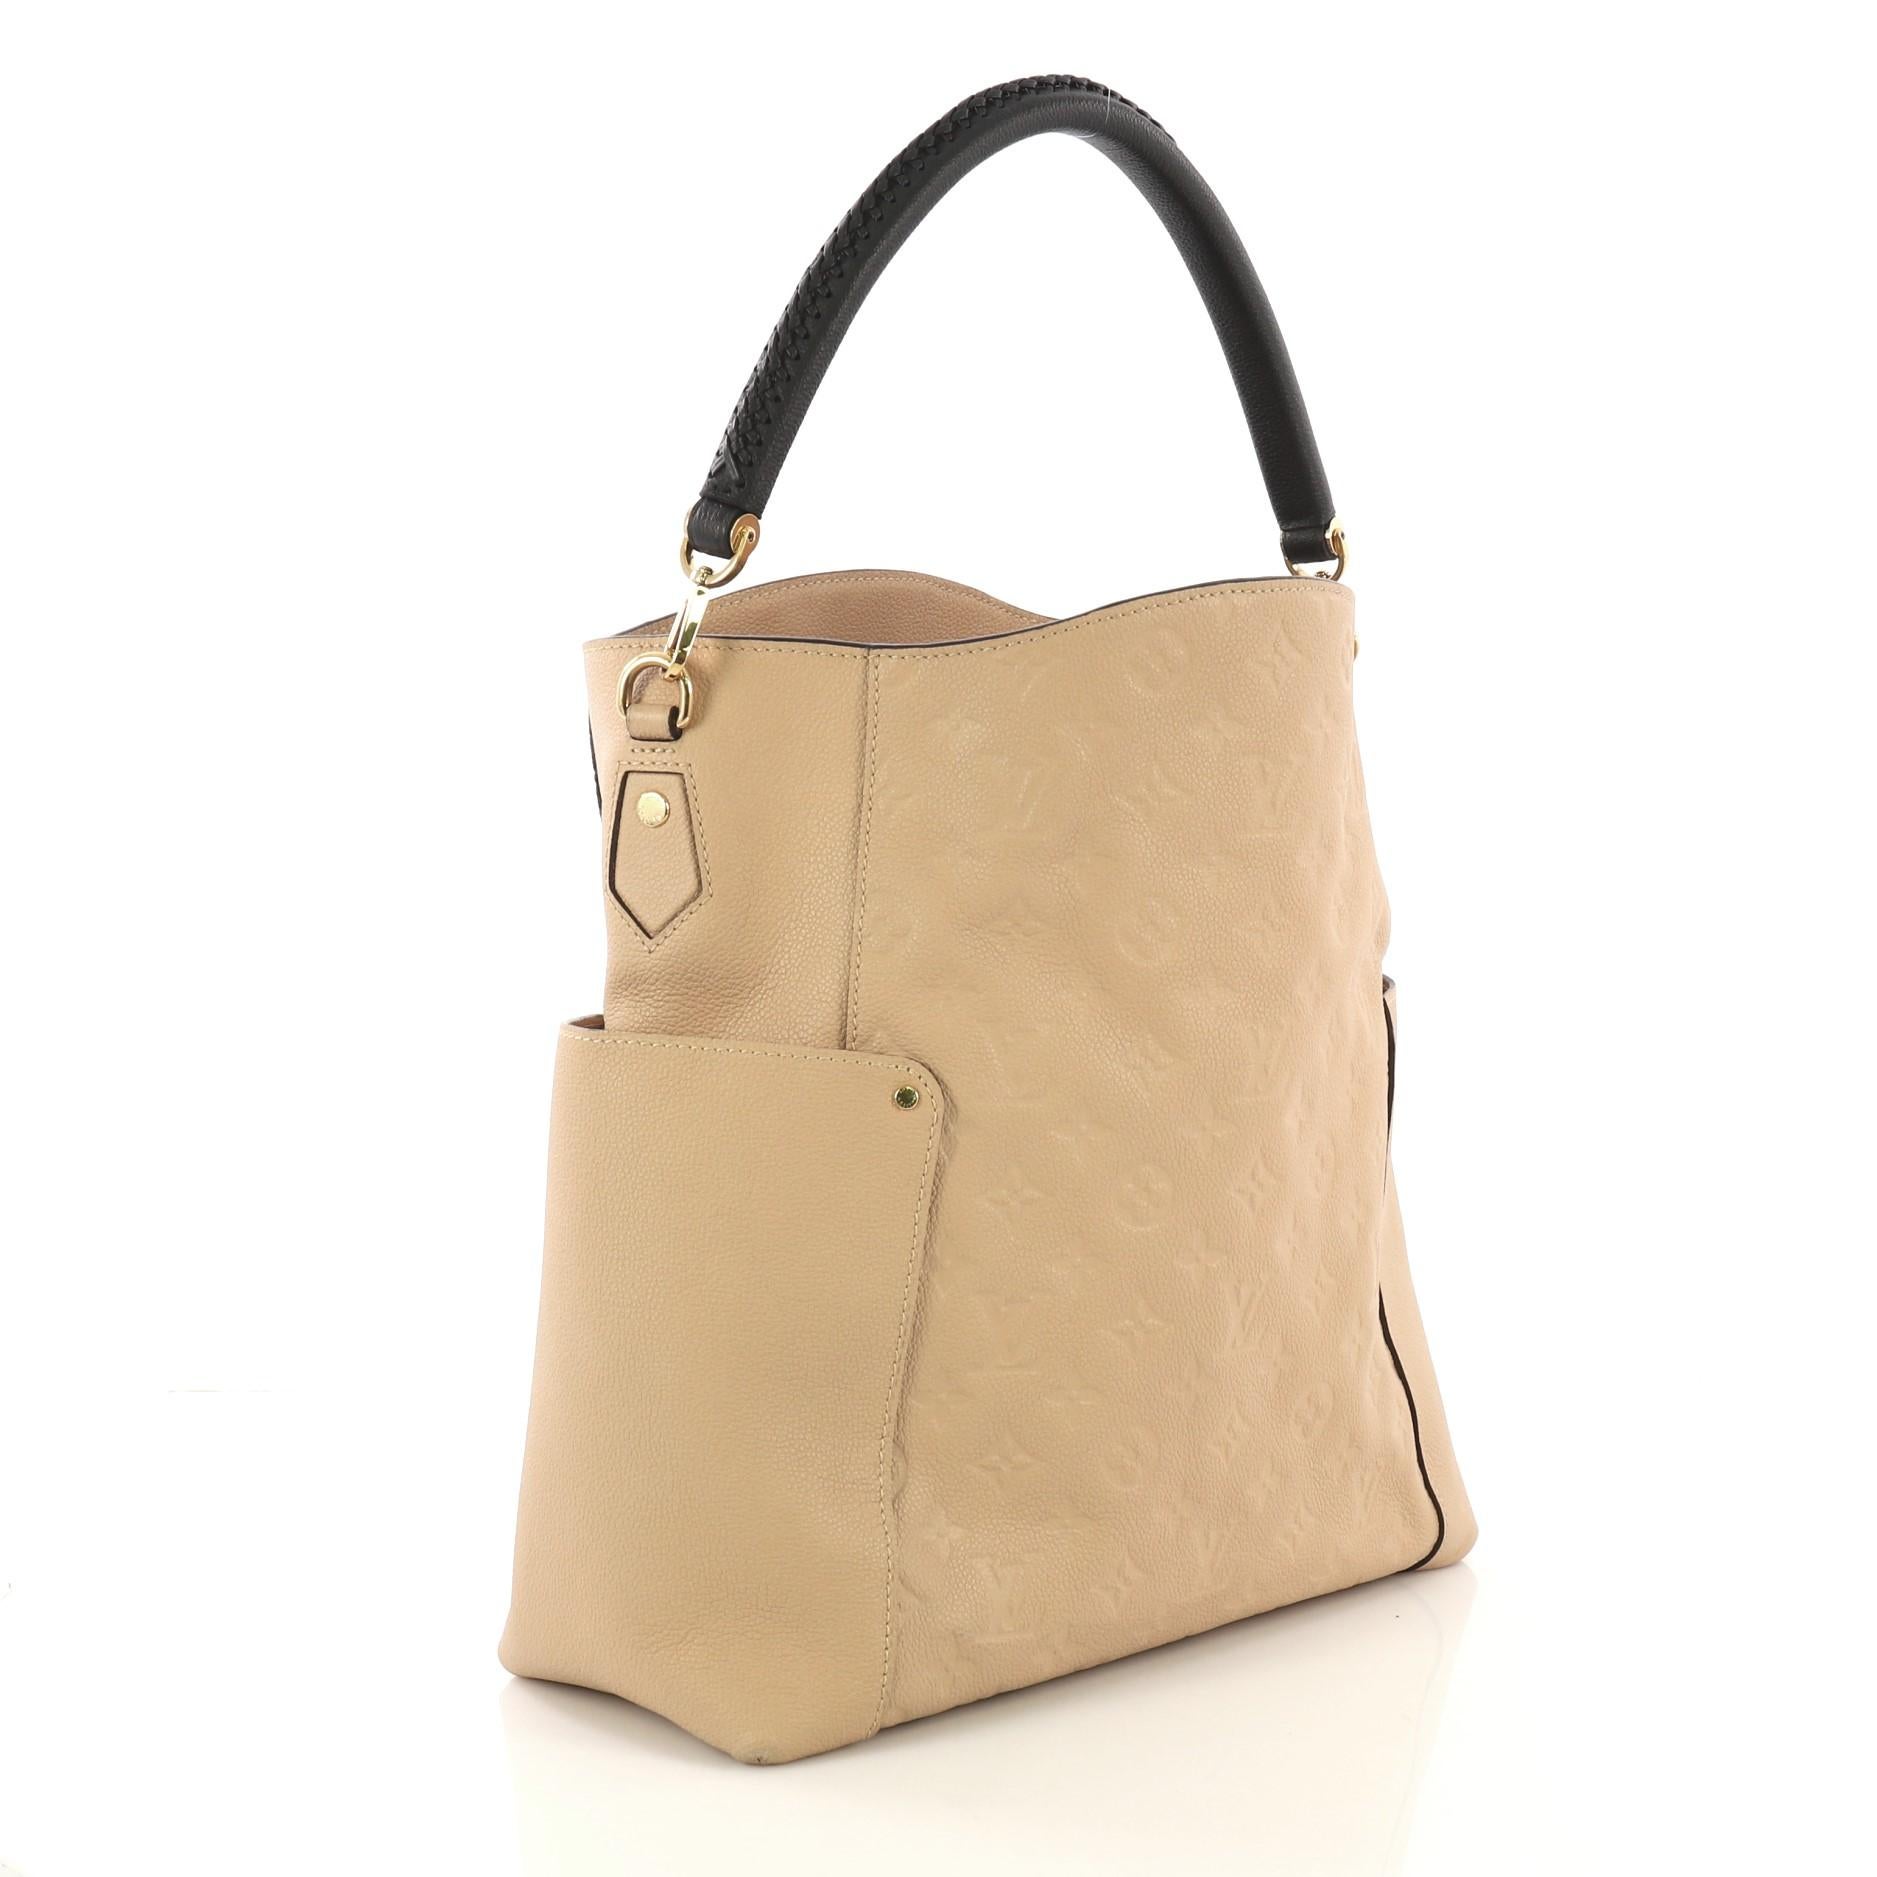 This Louis Vuitton Bagatelle Hobo Monogram Empreinte Leather, crafted from beige monogram empreinte leather, features a braided handle, exterior flat pockets on each side, and gold-tone hardware. Its wide open top showcases a beige fabric interior